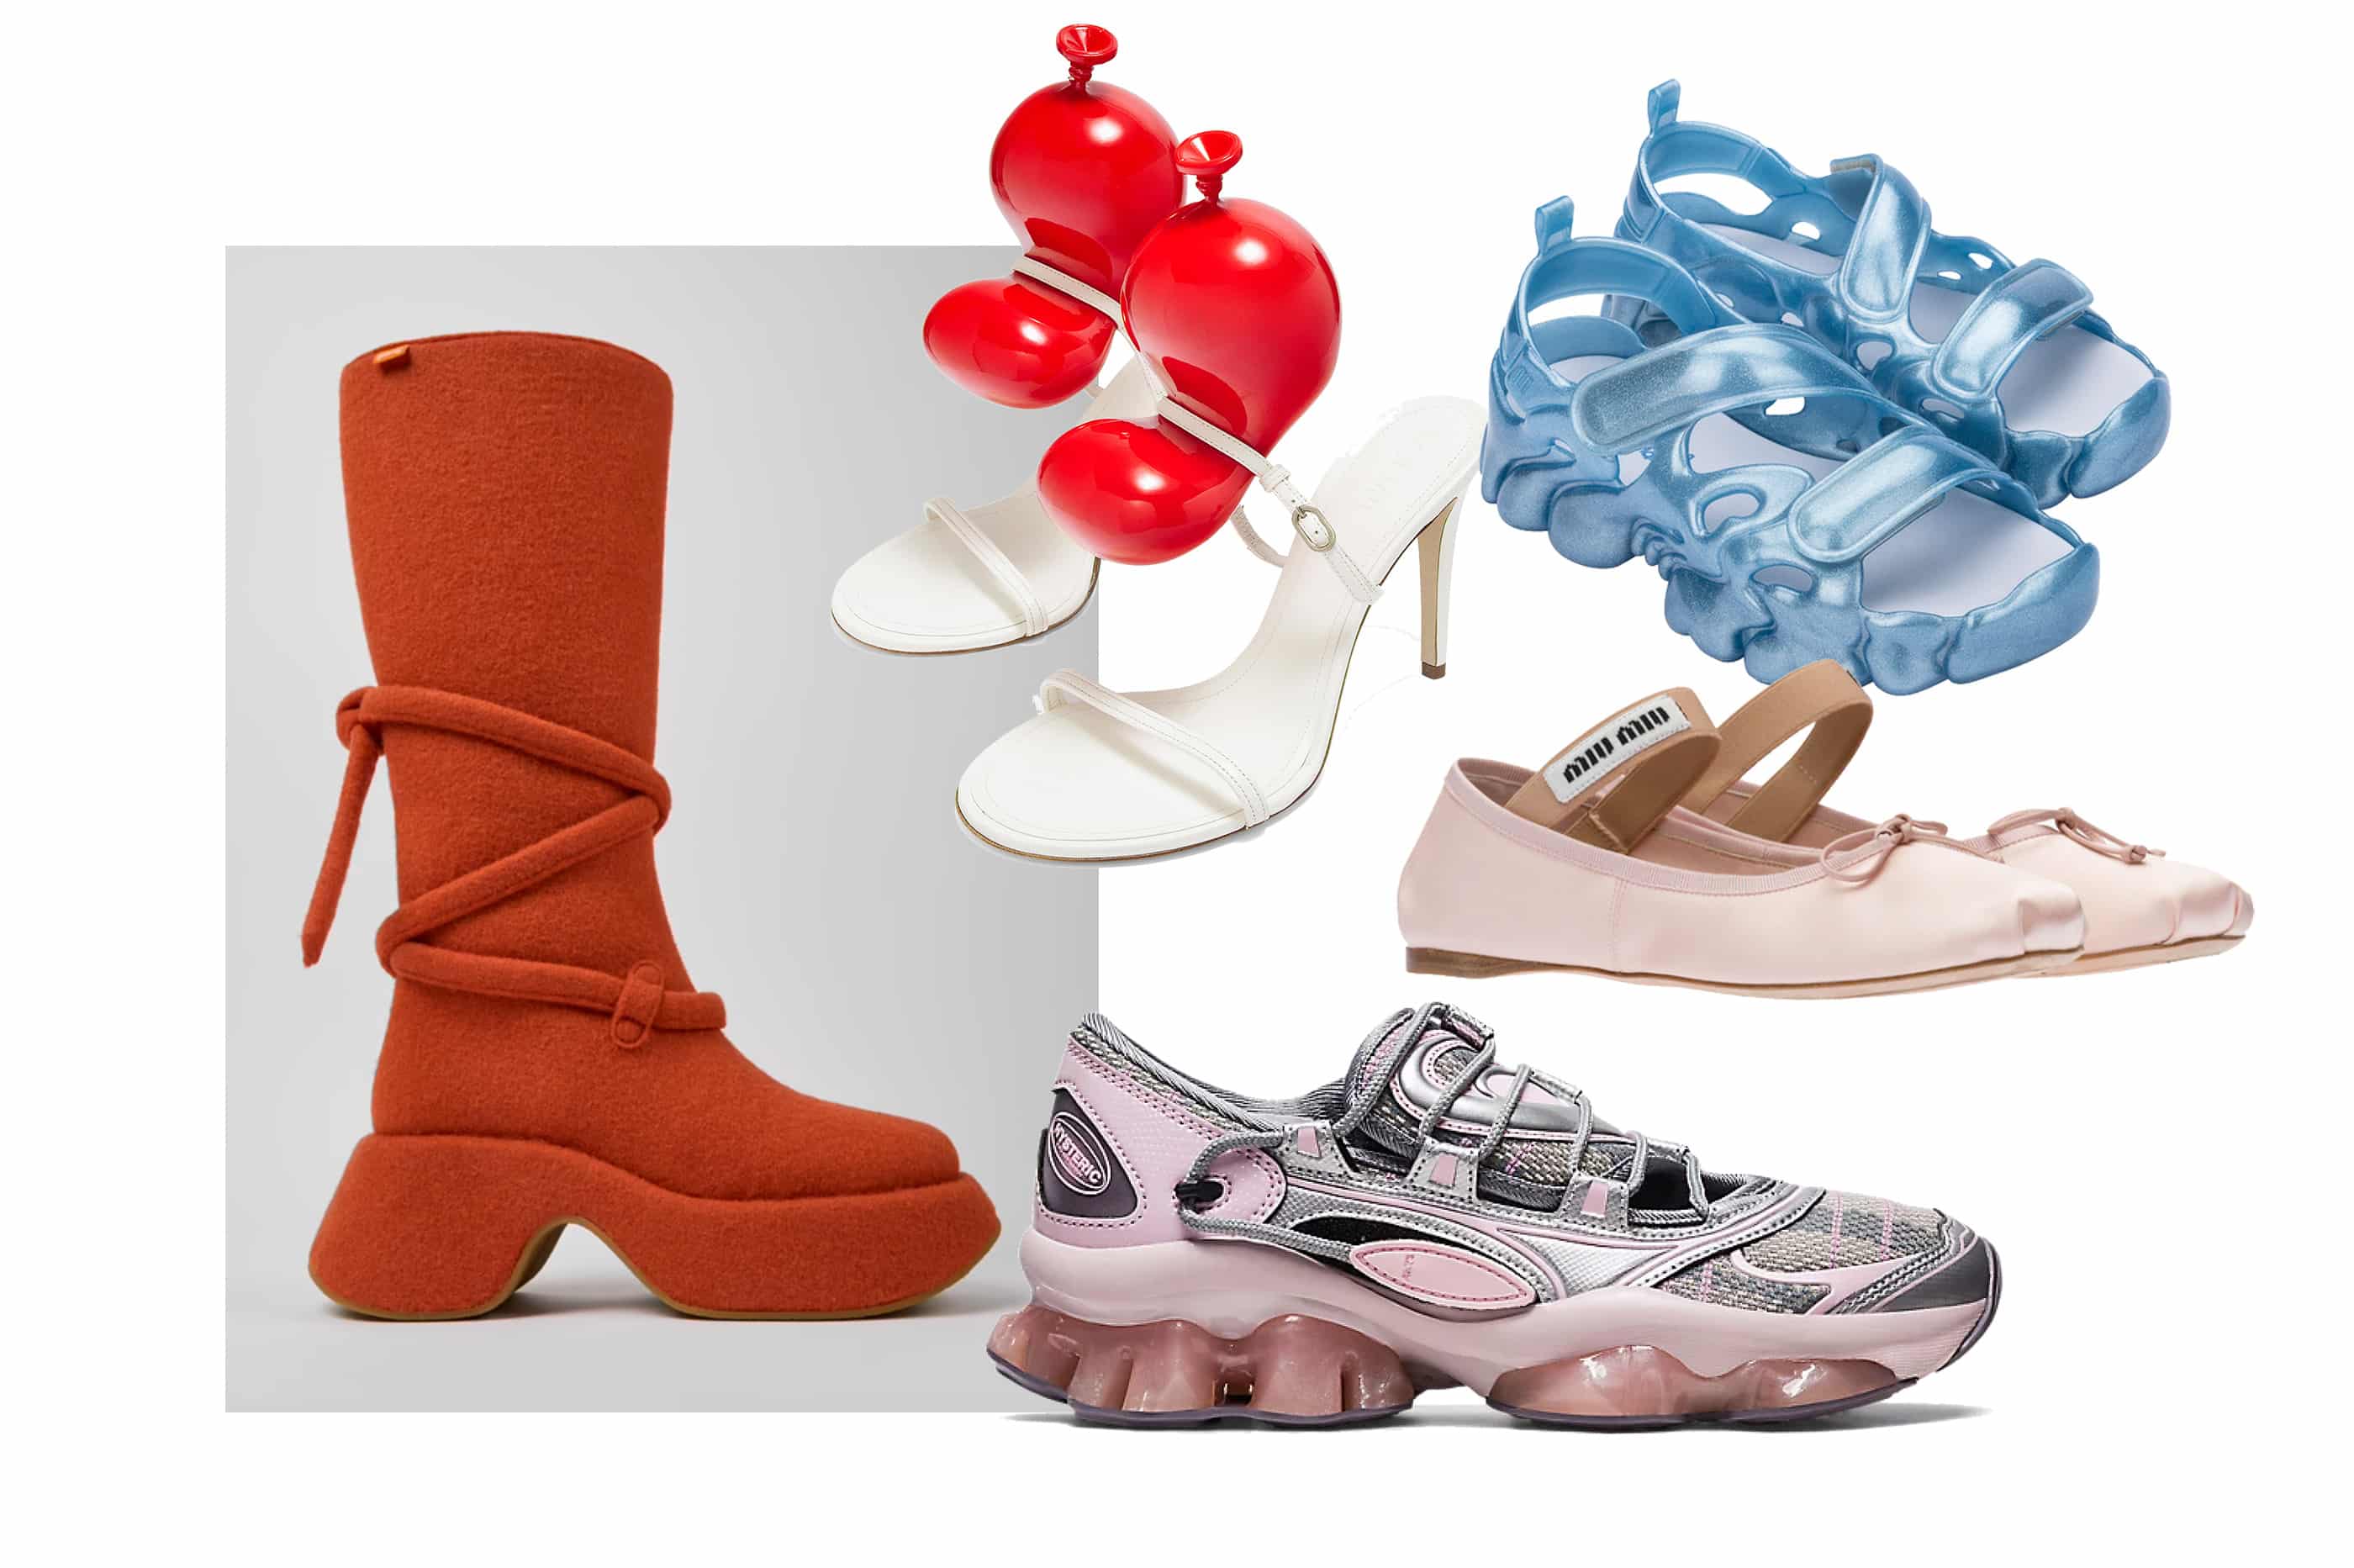 Will this be the next big ugly shoe trend?